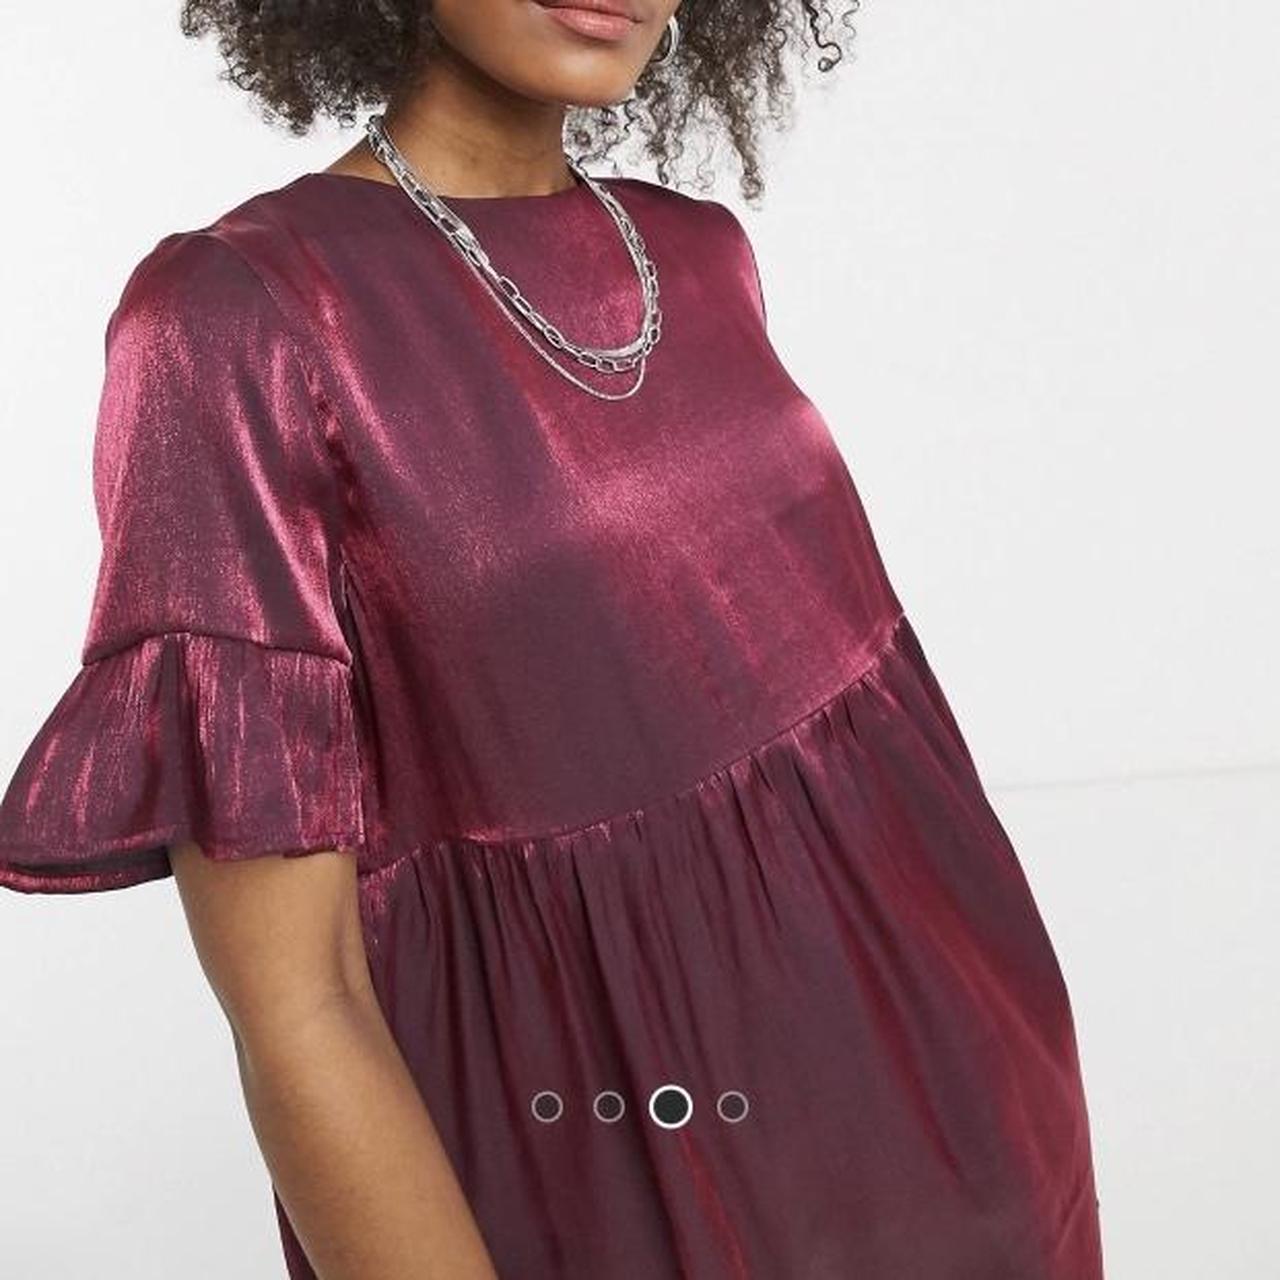 Lola May Women's Pink and Burgundy Dress